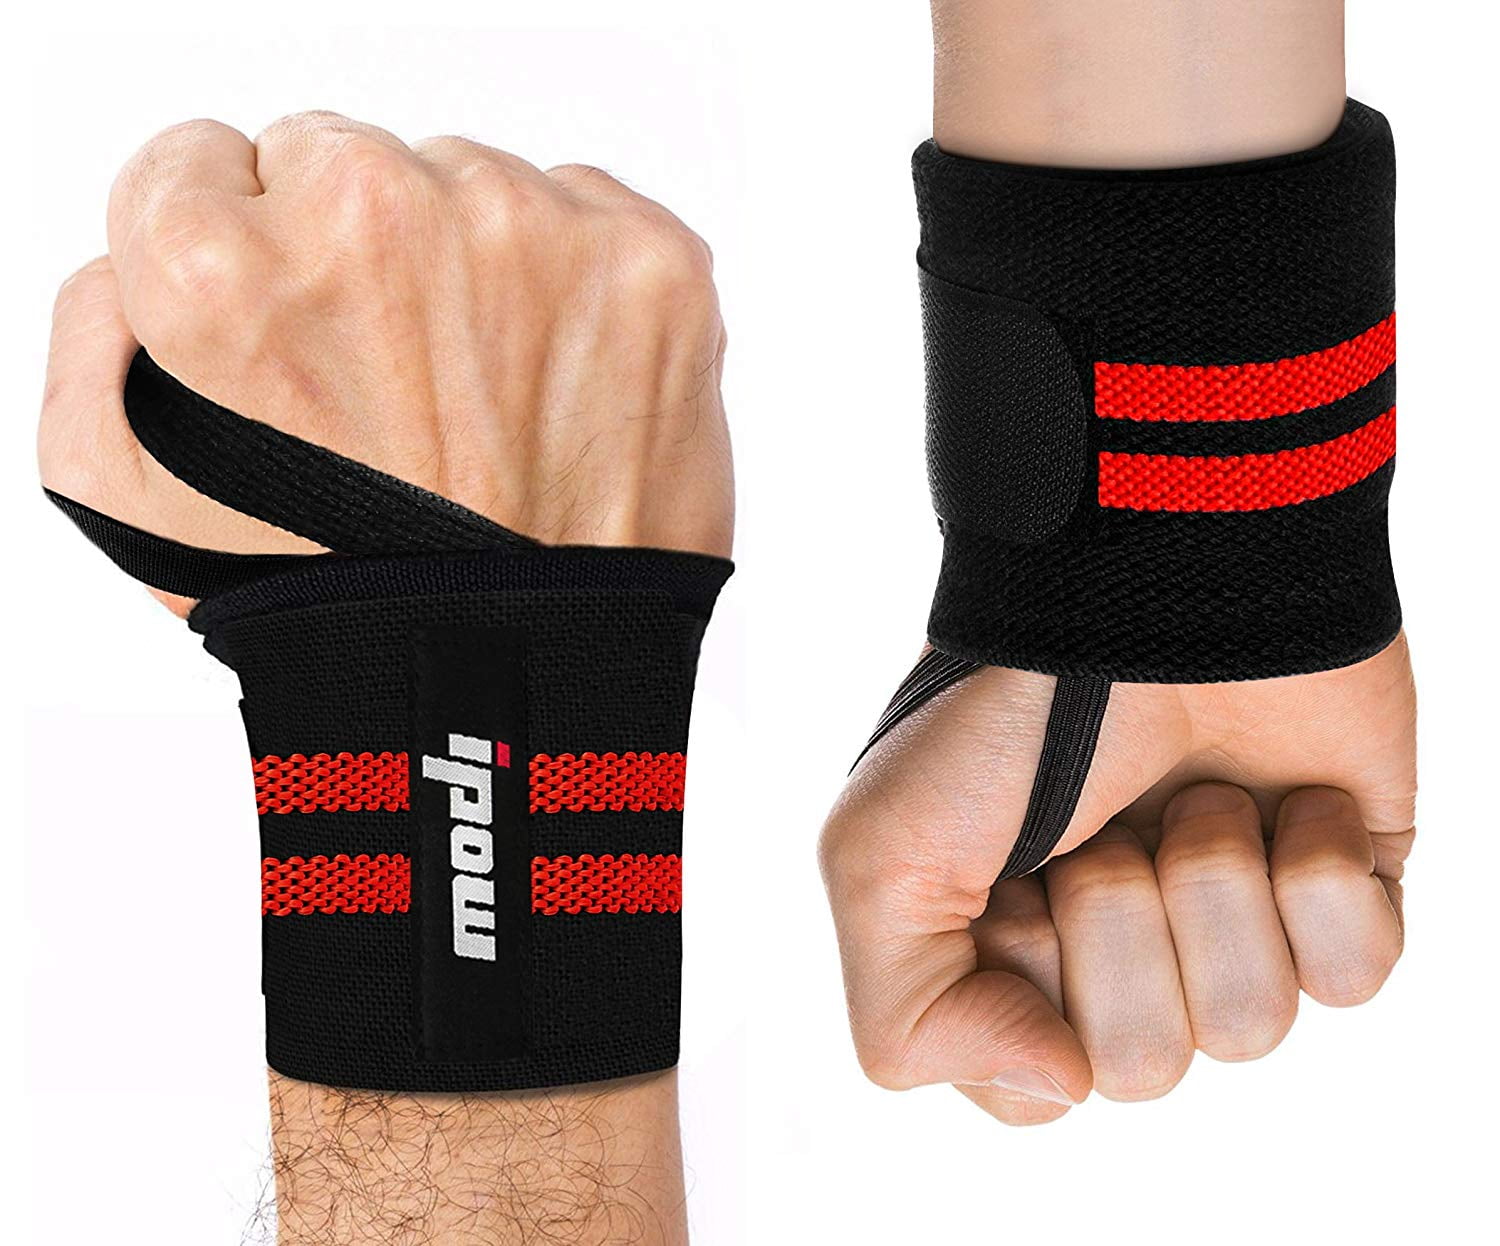 New 18" Rogue Fitness Wrist Wraps Medium Black/Red Power Weightlifting Crossfit 